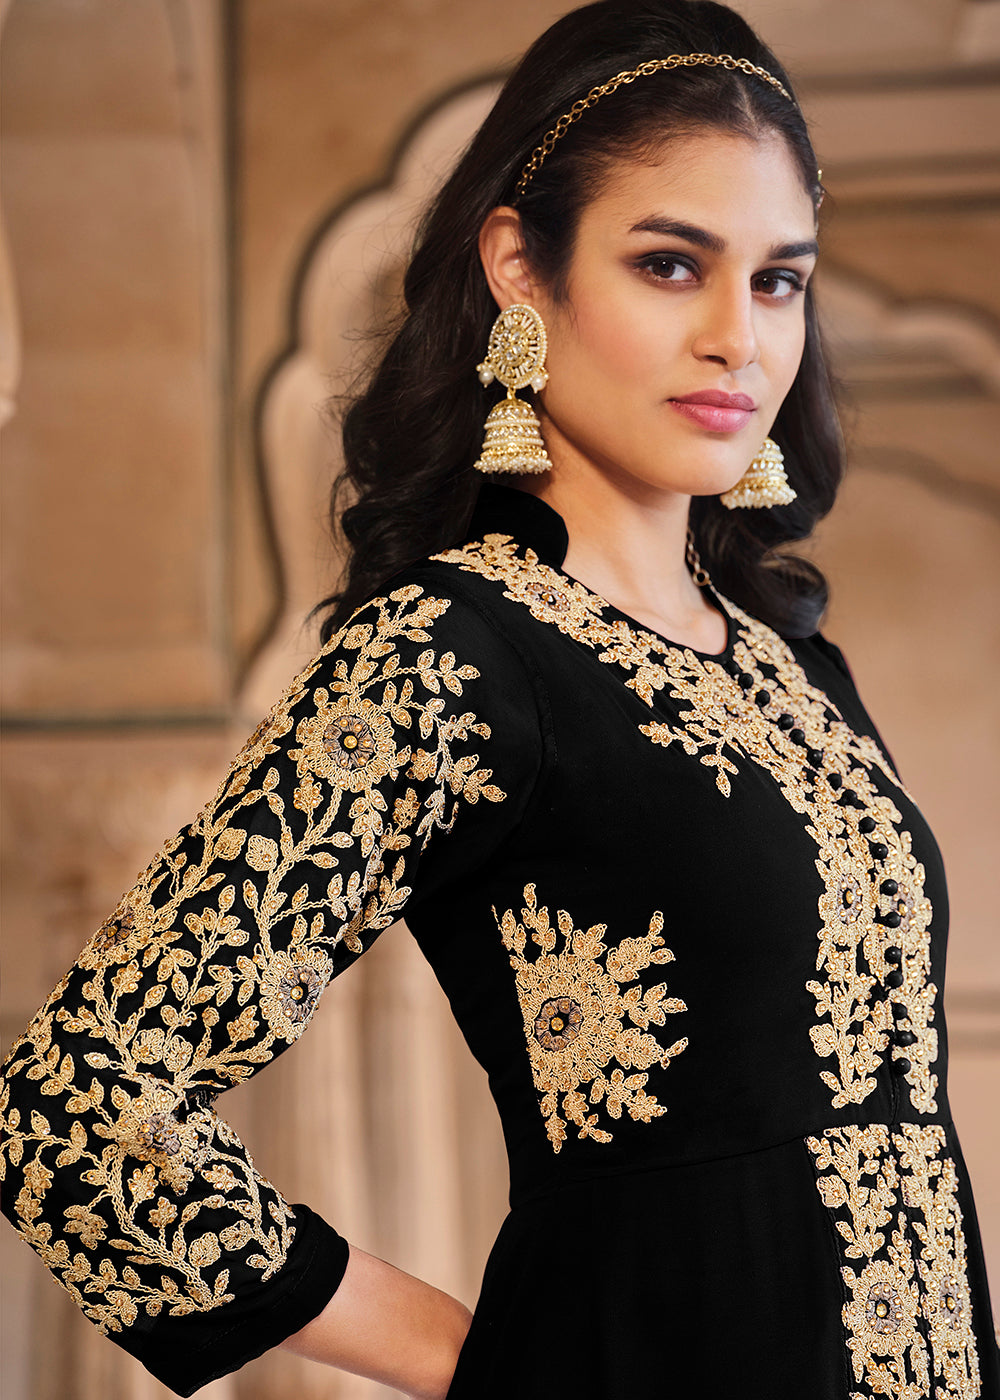 Buy Now Stone Embroidered Divine Black Slit Style Anarkali Suit Online in USA, UK, Australia, New Zealand, Canada, Italy & Worldwide at Empress Clothing. 